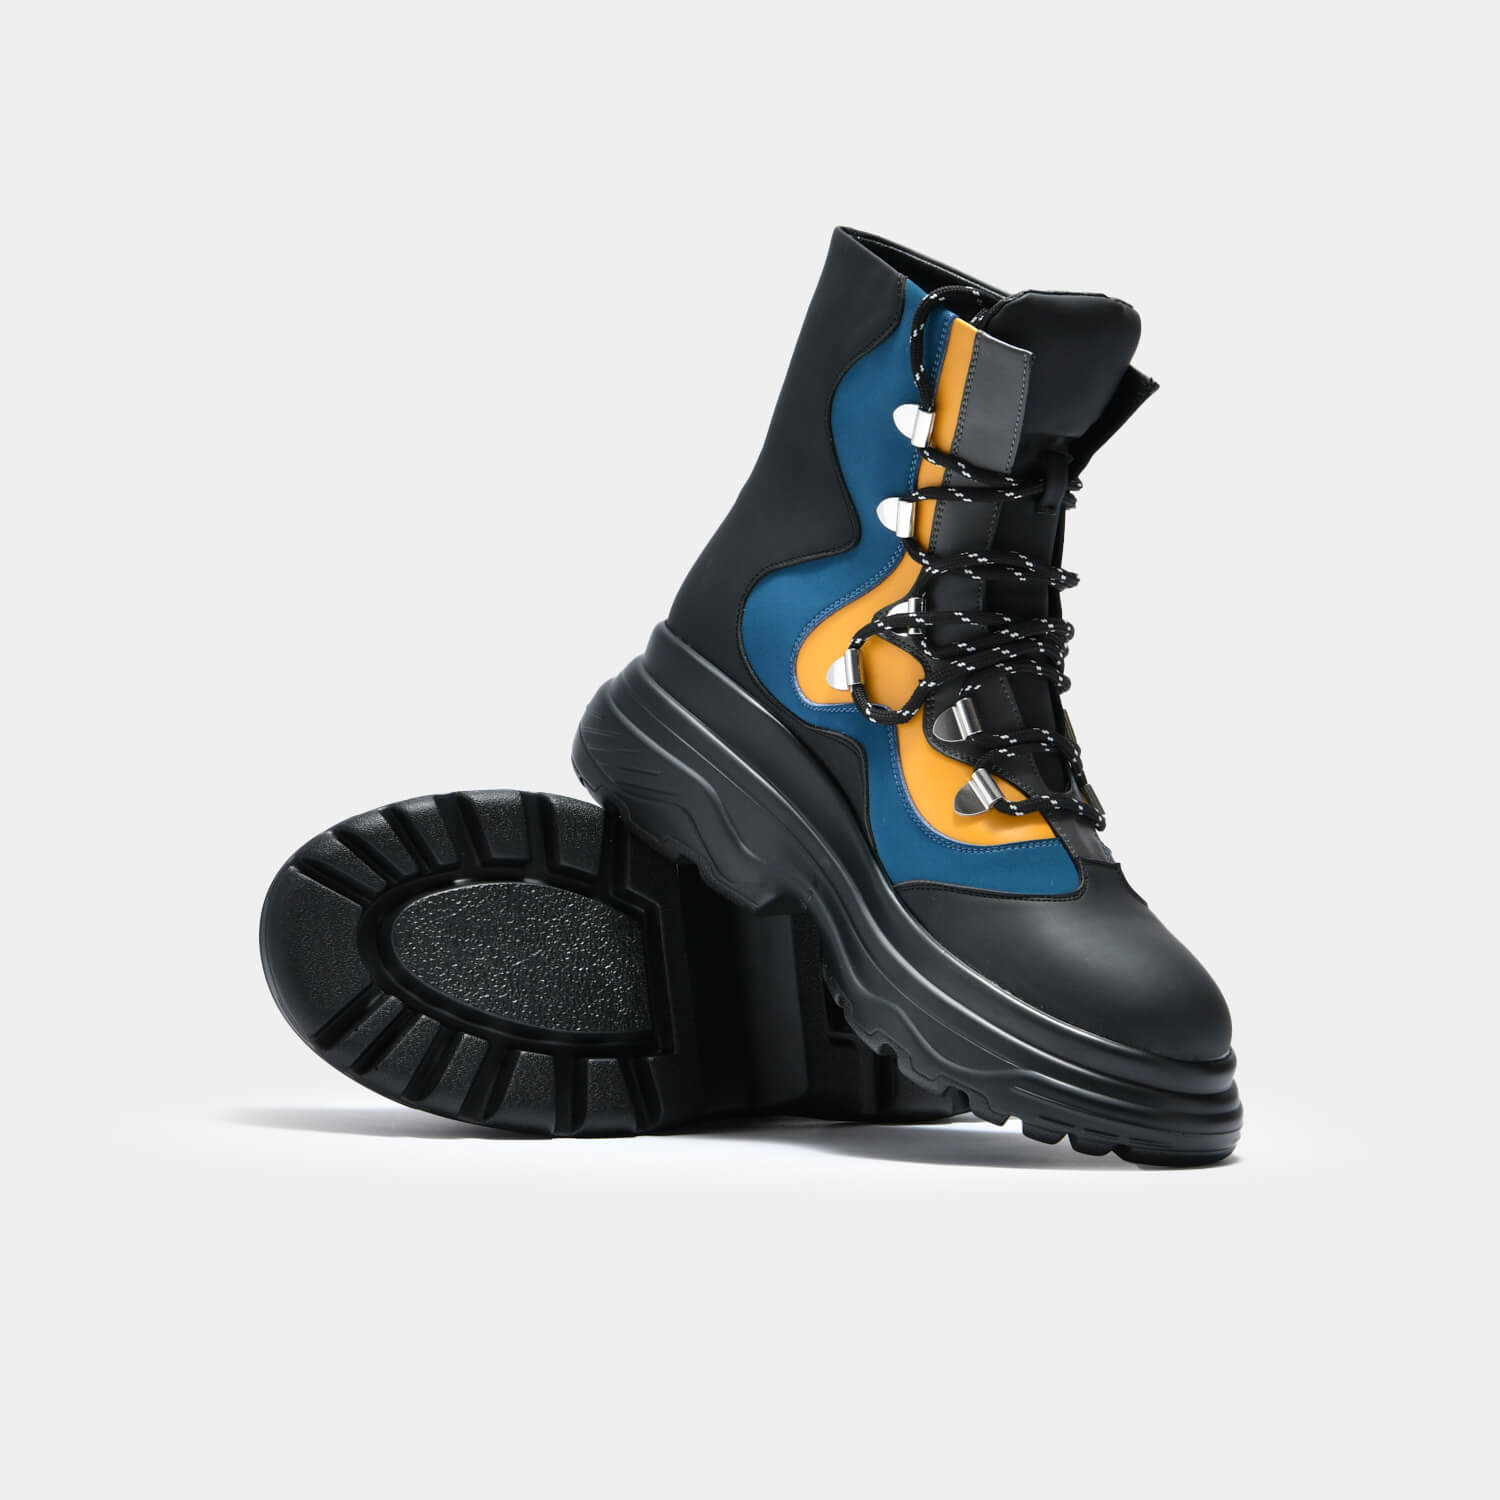 Ajax Men's Trail Boots - Ankle Boots - KOI Footwear - Black - Sole and Side View